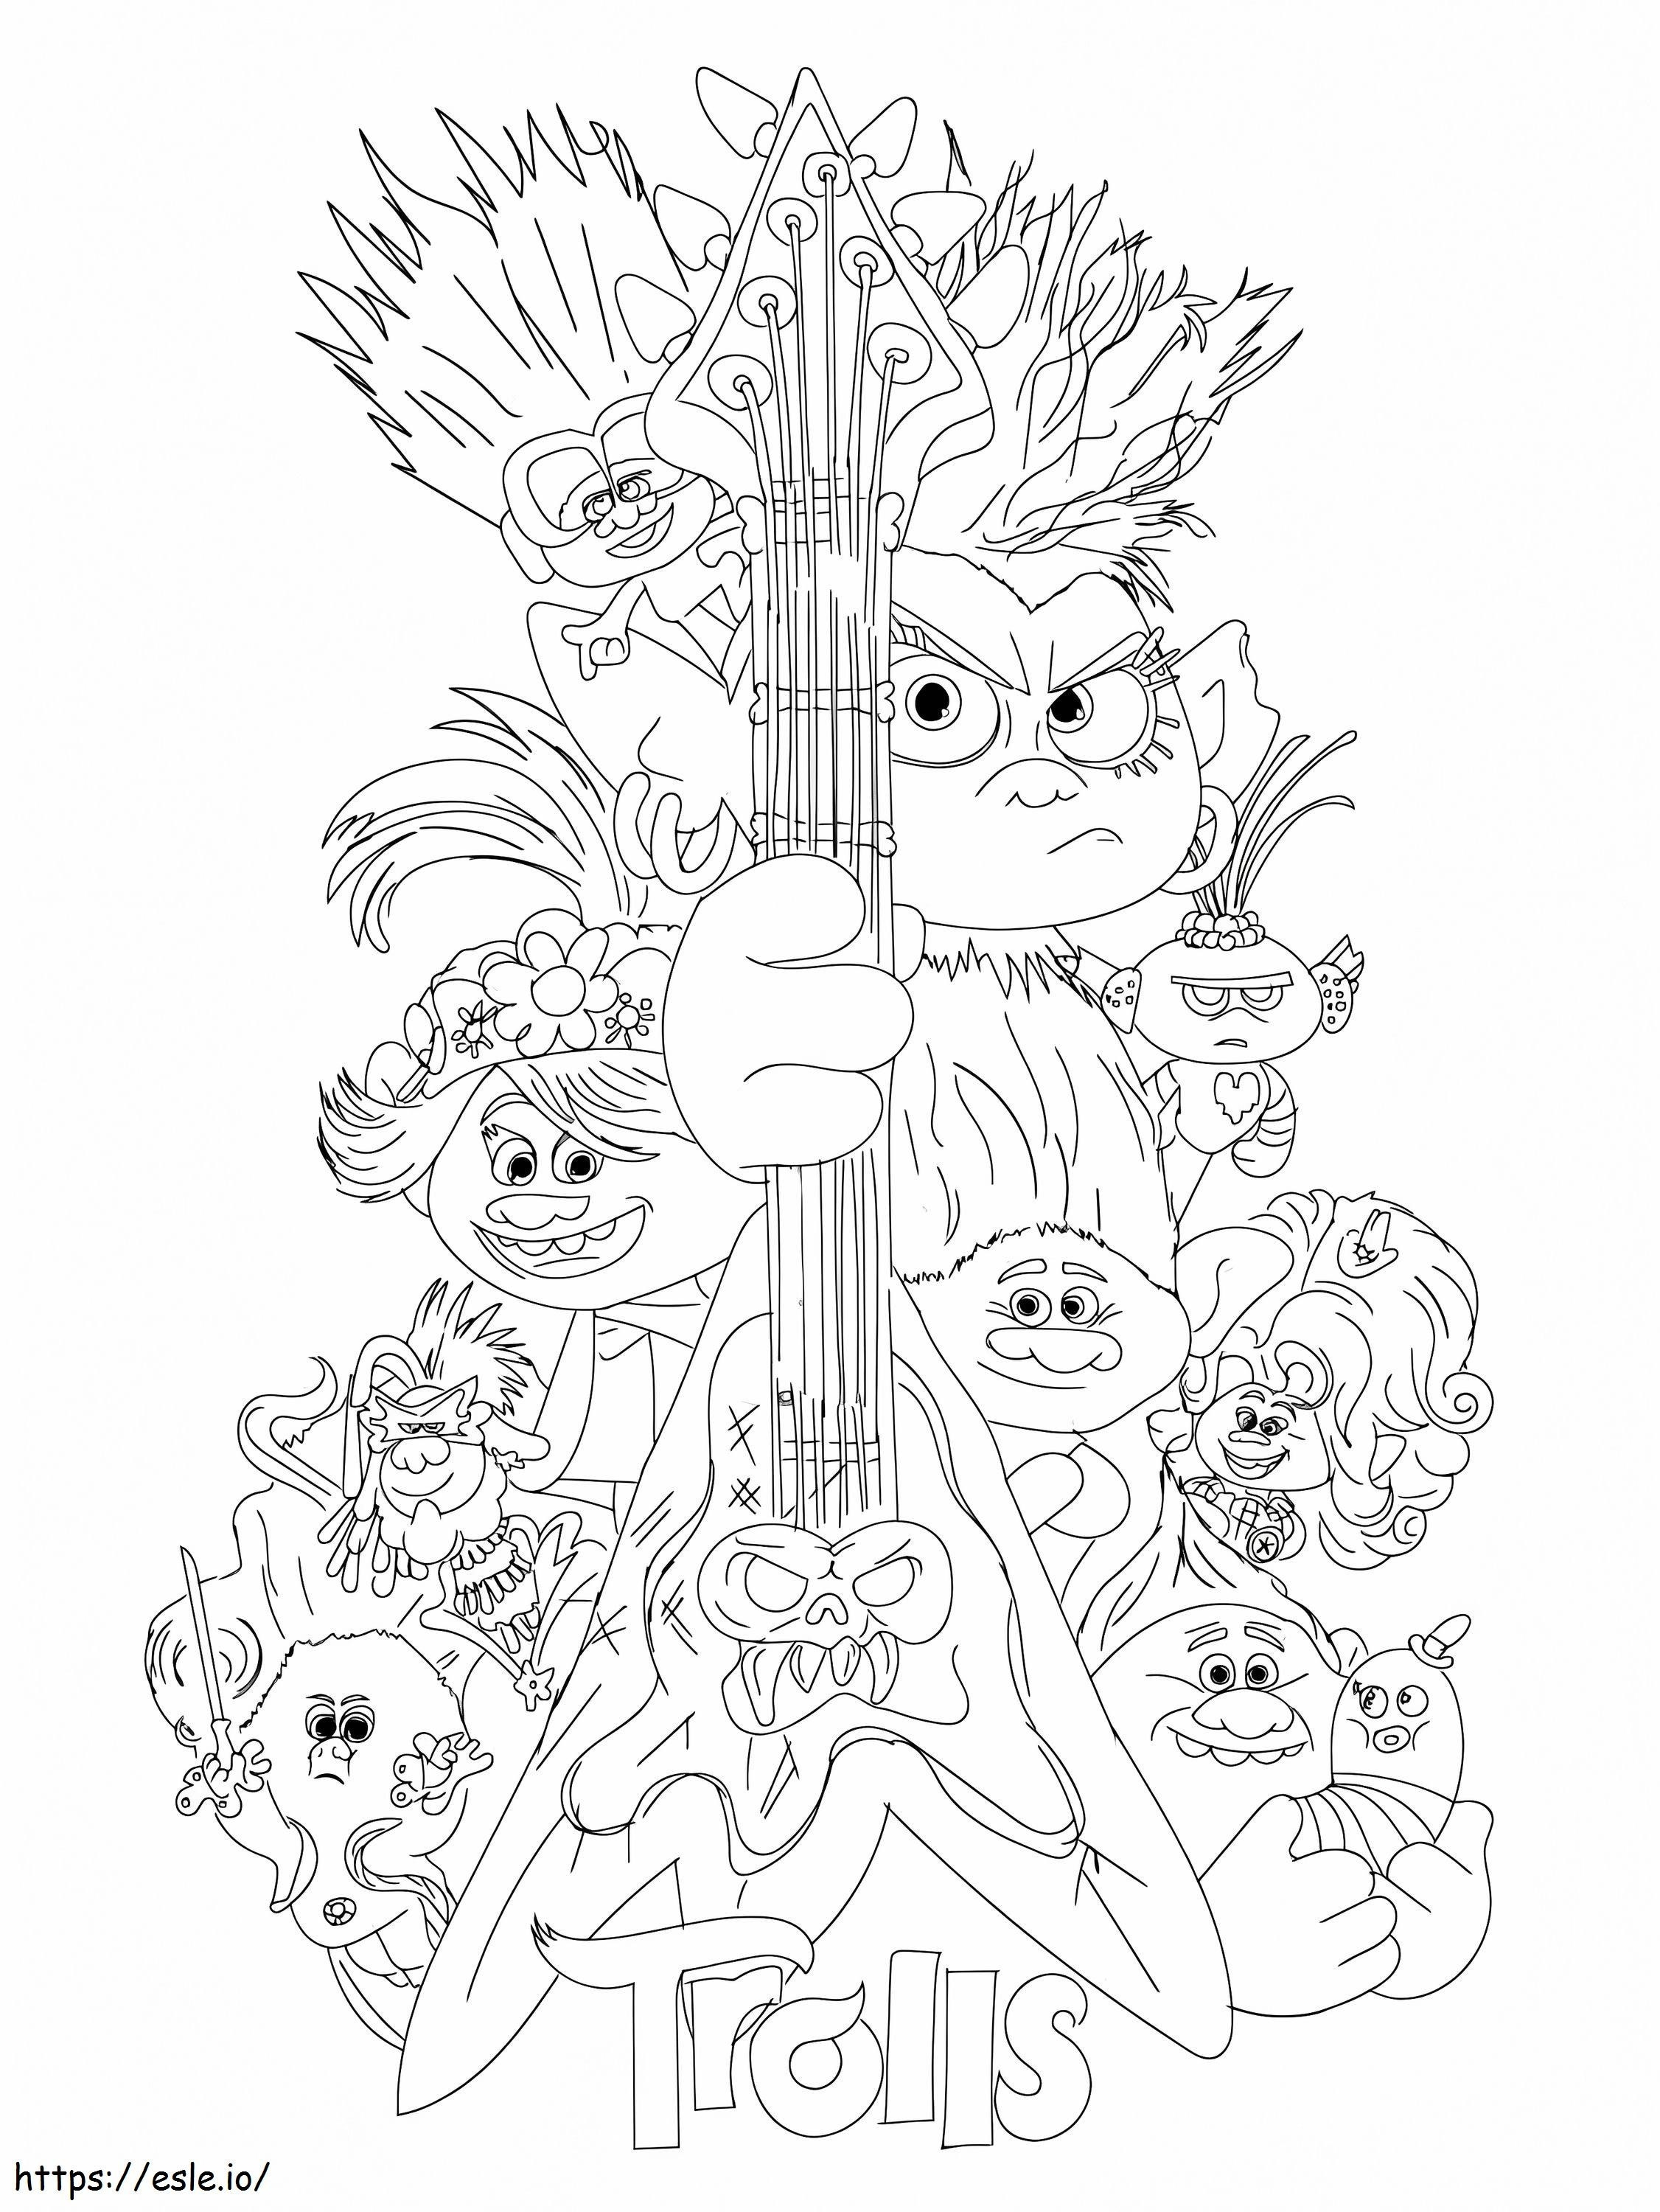 1589445939 Wonder Day Trolls 38 coloring page